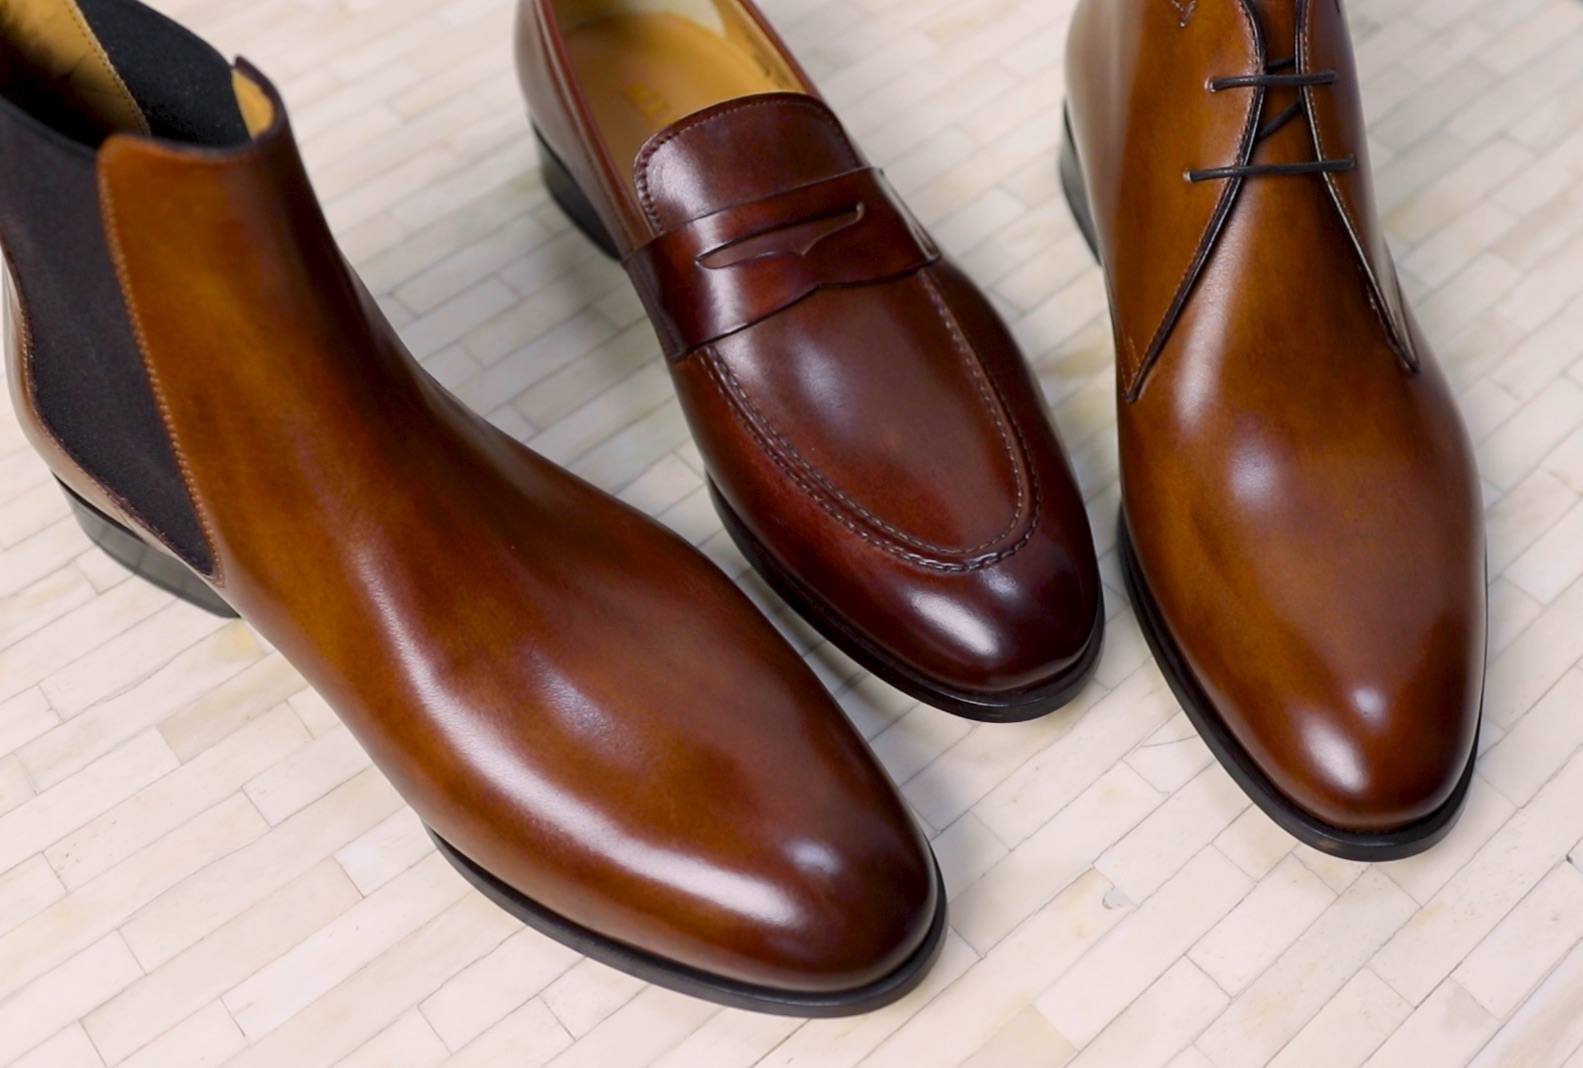 What To Wear With Brown Shoes: Matching Pants to Light Brown, Tan, or  Cognac Leather · Effortless Gent